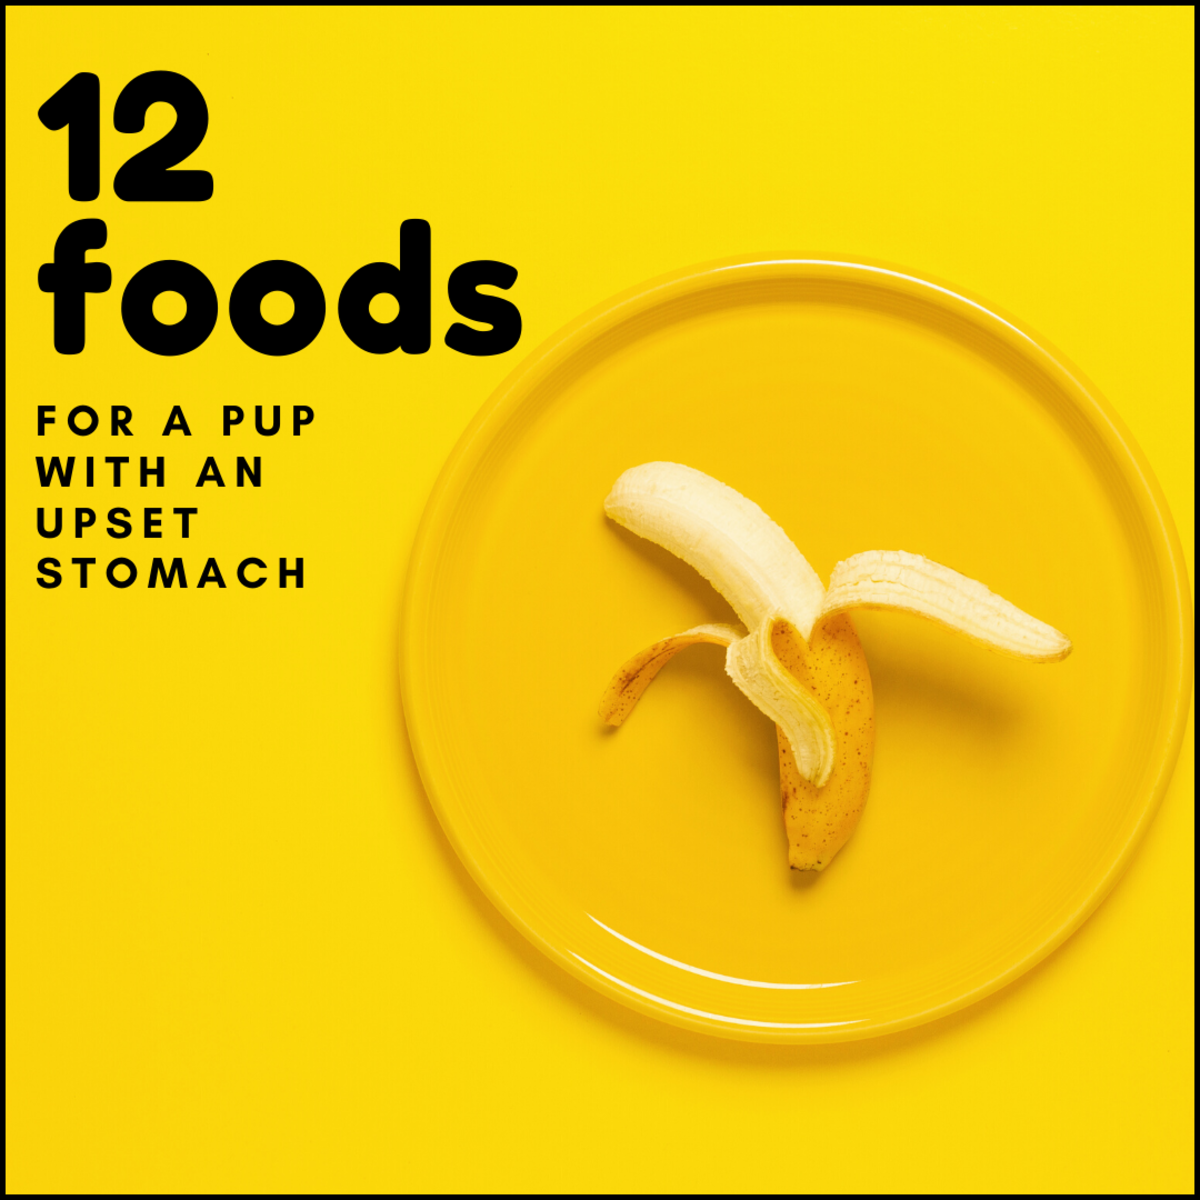 12 Human Foods To Give To Dogs With Diarrhea Or Upset Stomach - Pethelpful